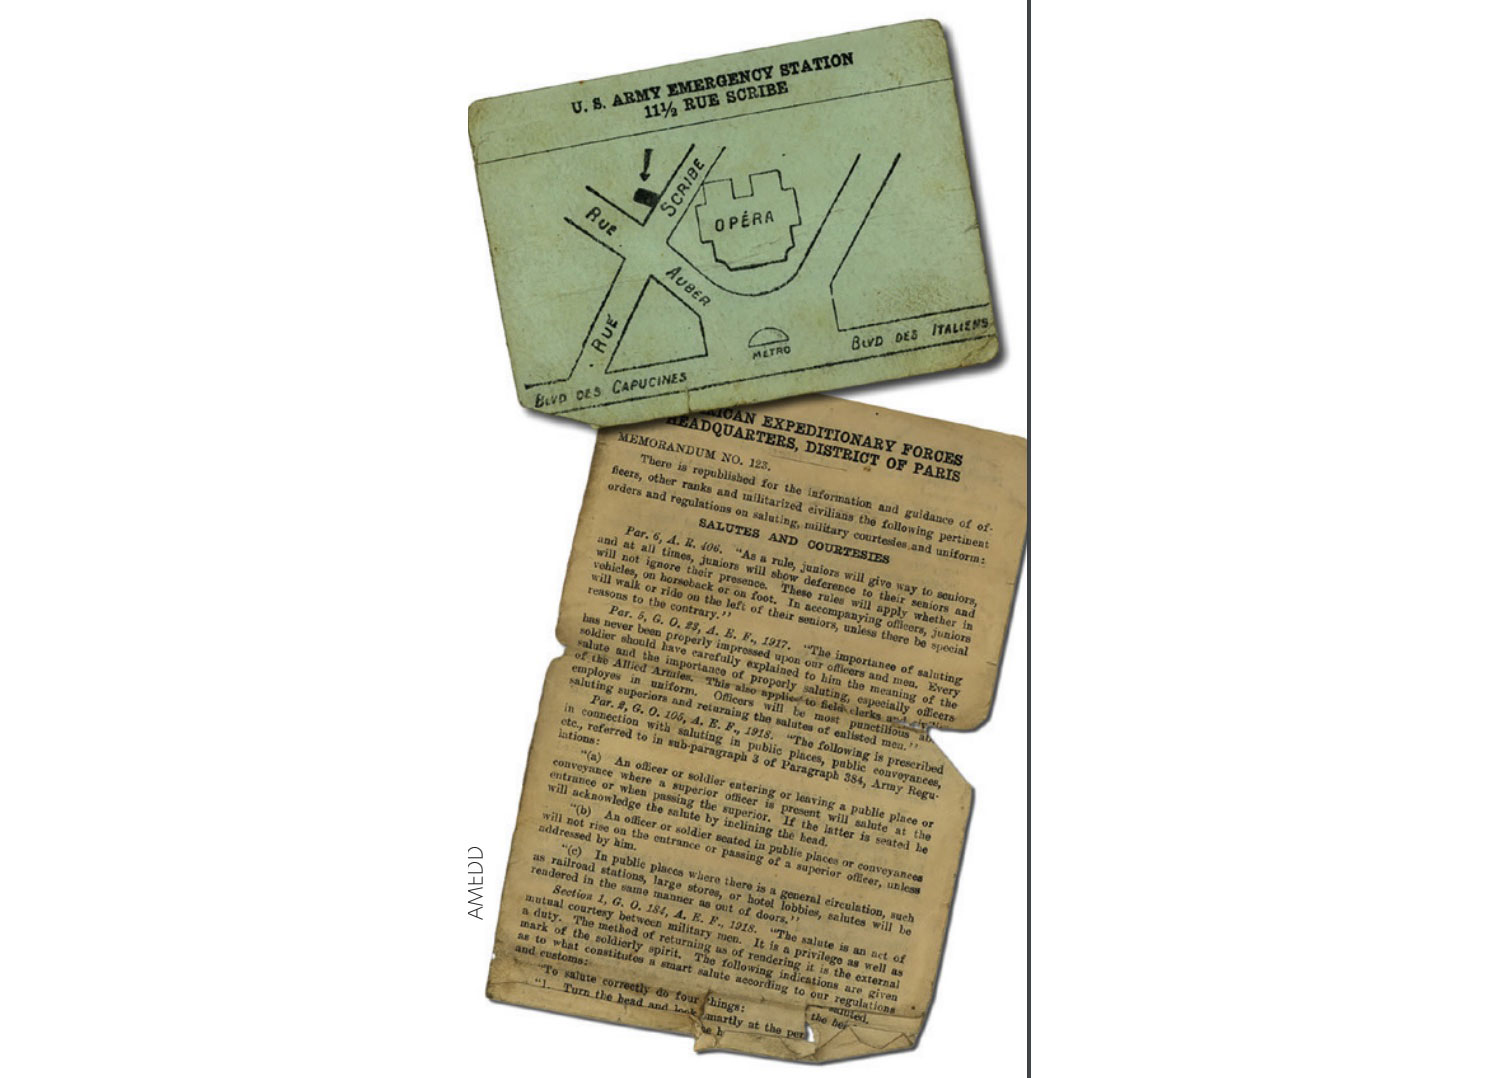 A flyer with instructions for AEF troops when on leave to Paris along with a map showing the location of the main “emergency (prophylactic) station.”